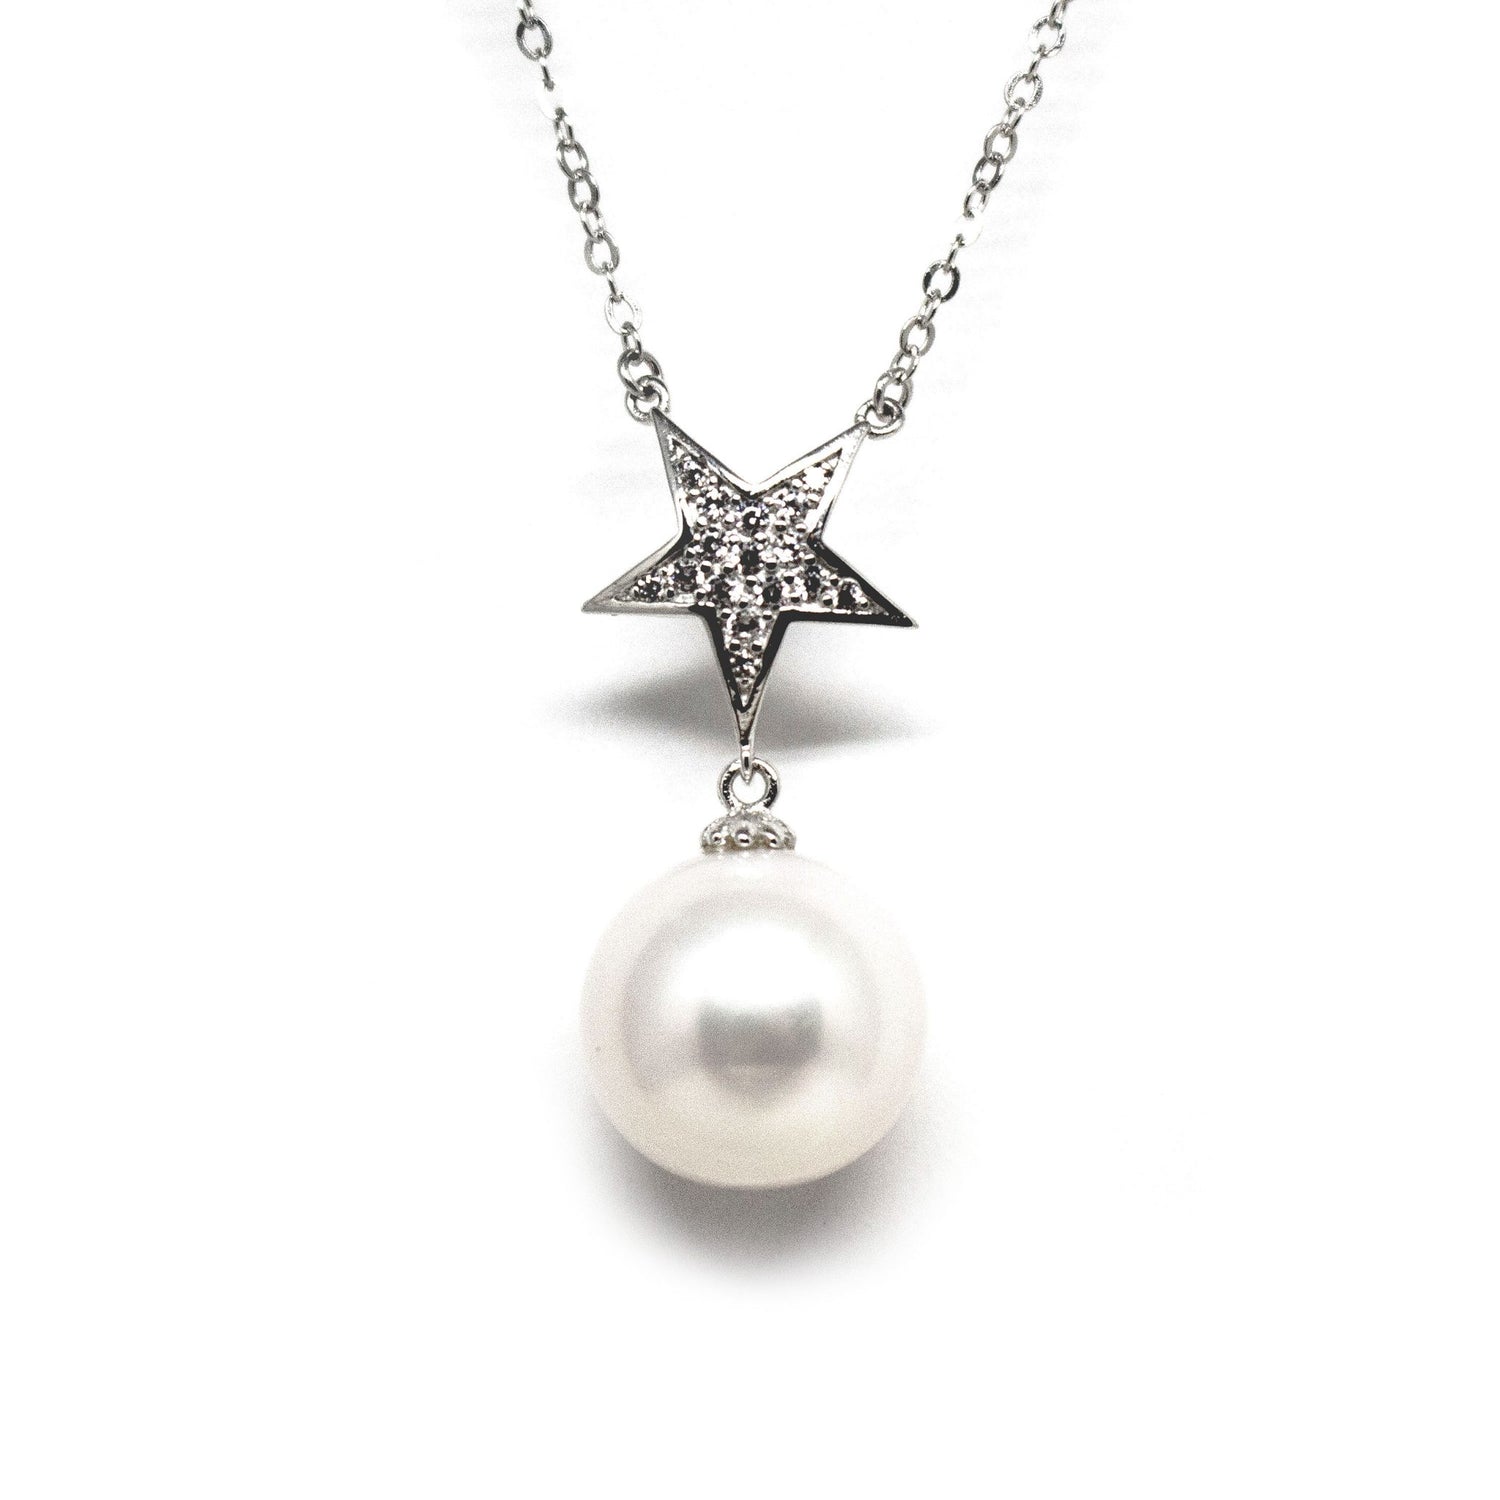 Shining Star Edison Pearl Necklace - Timeless Pearl